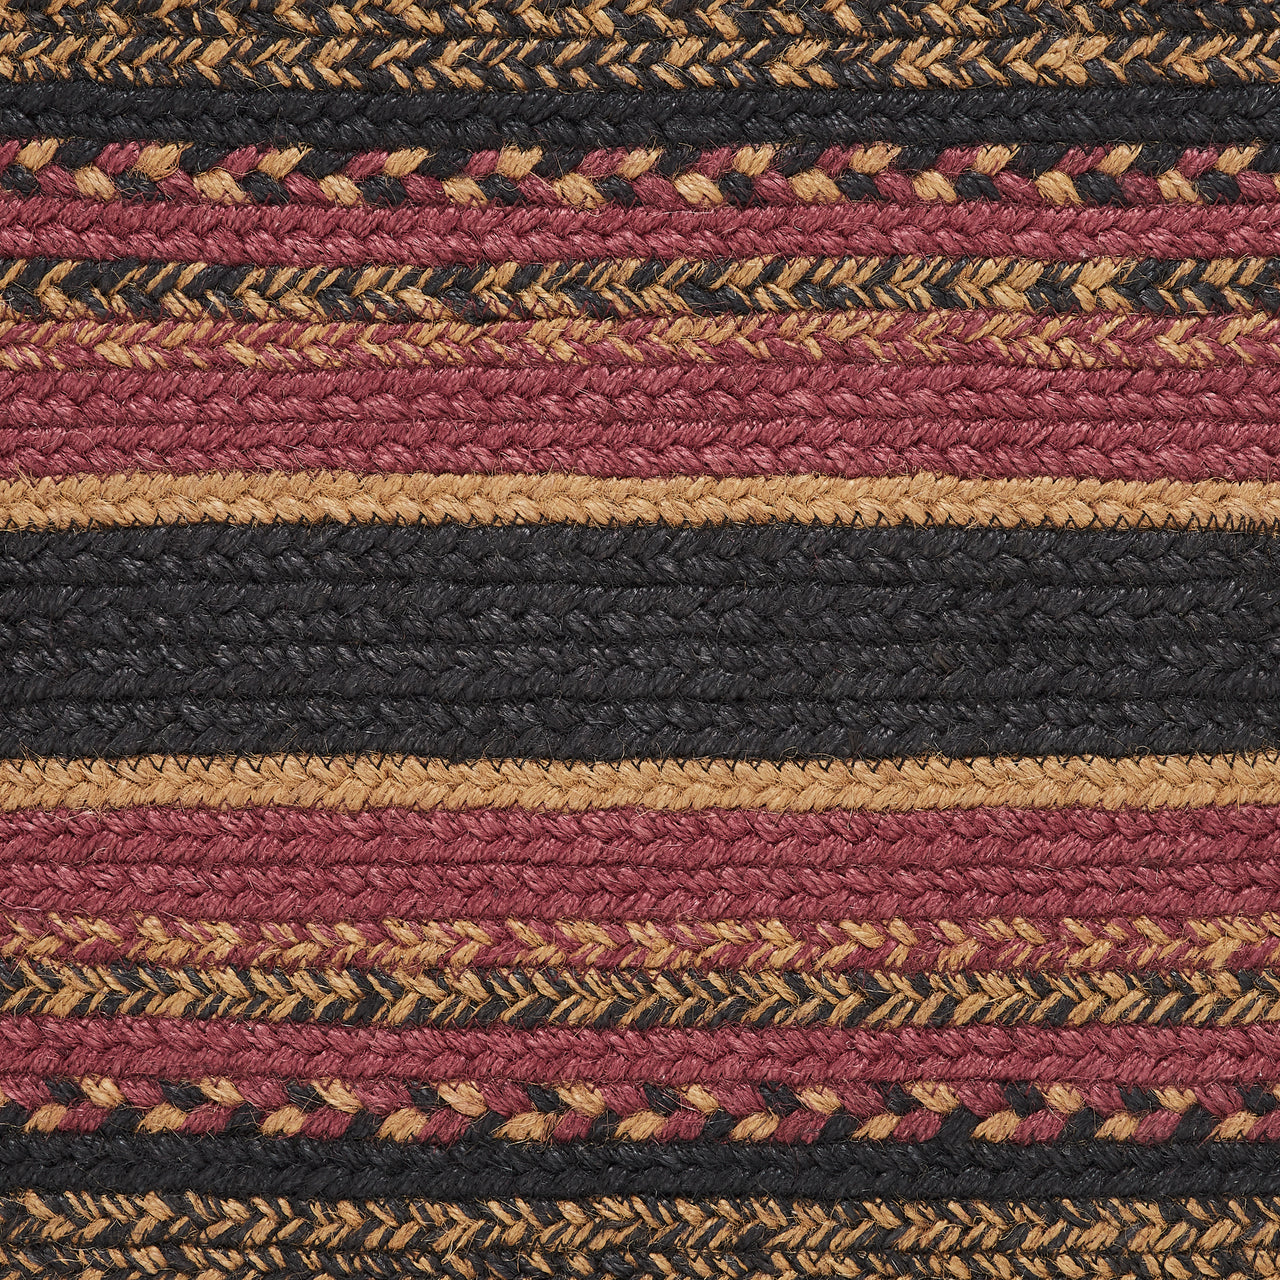 Heritage Farms Jute Braided Rug Rect. with Rug Pad 20"x30" VHC Brands